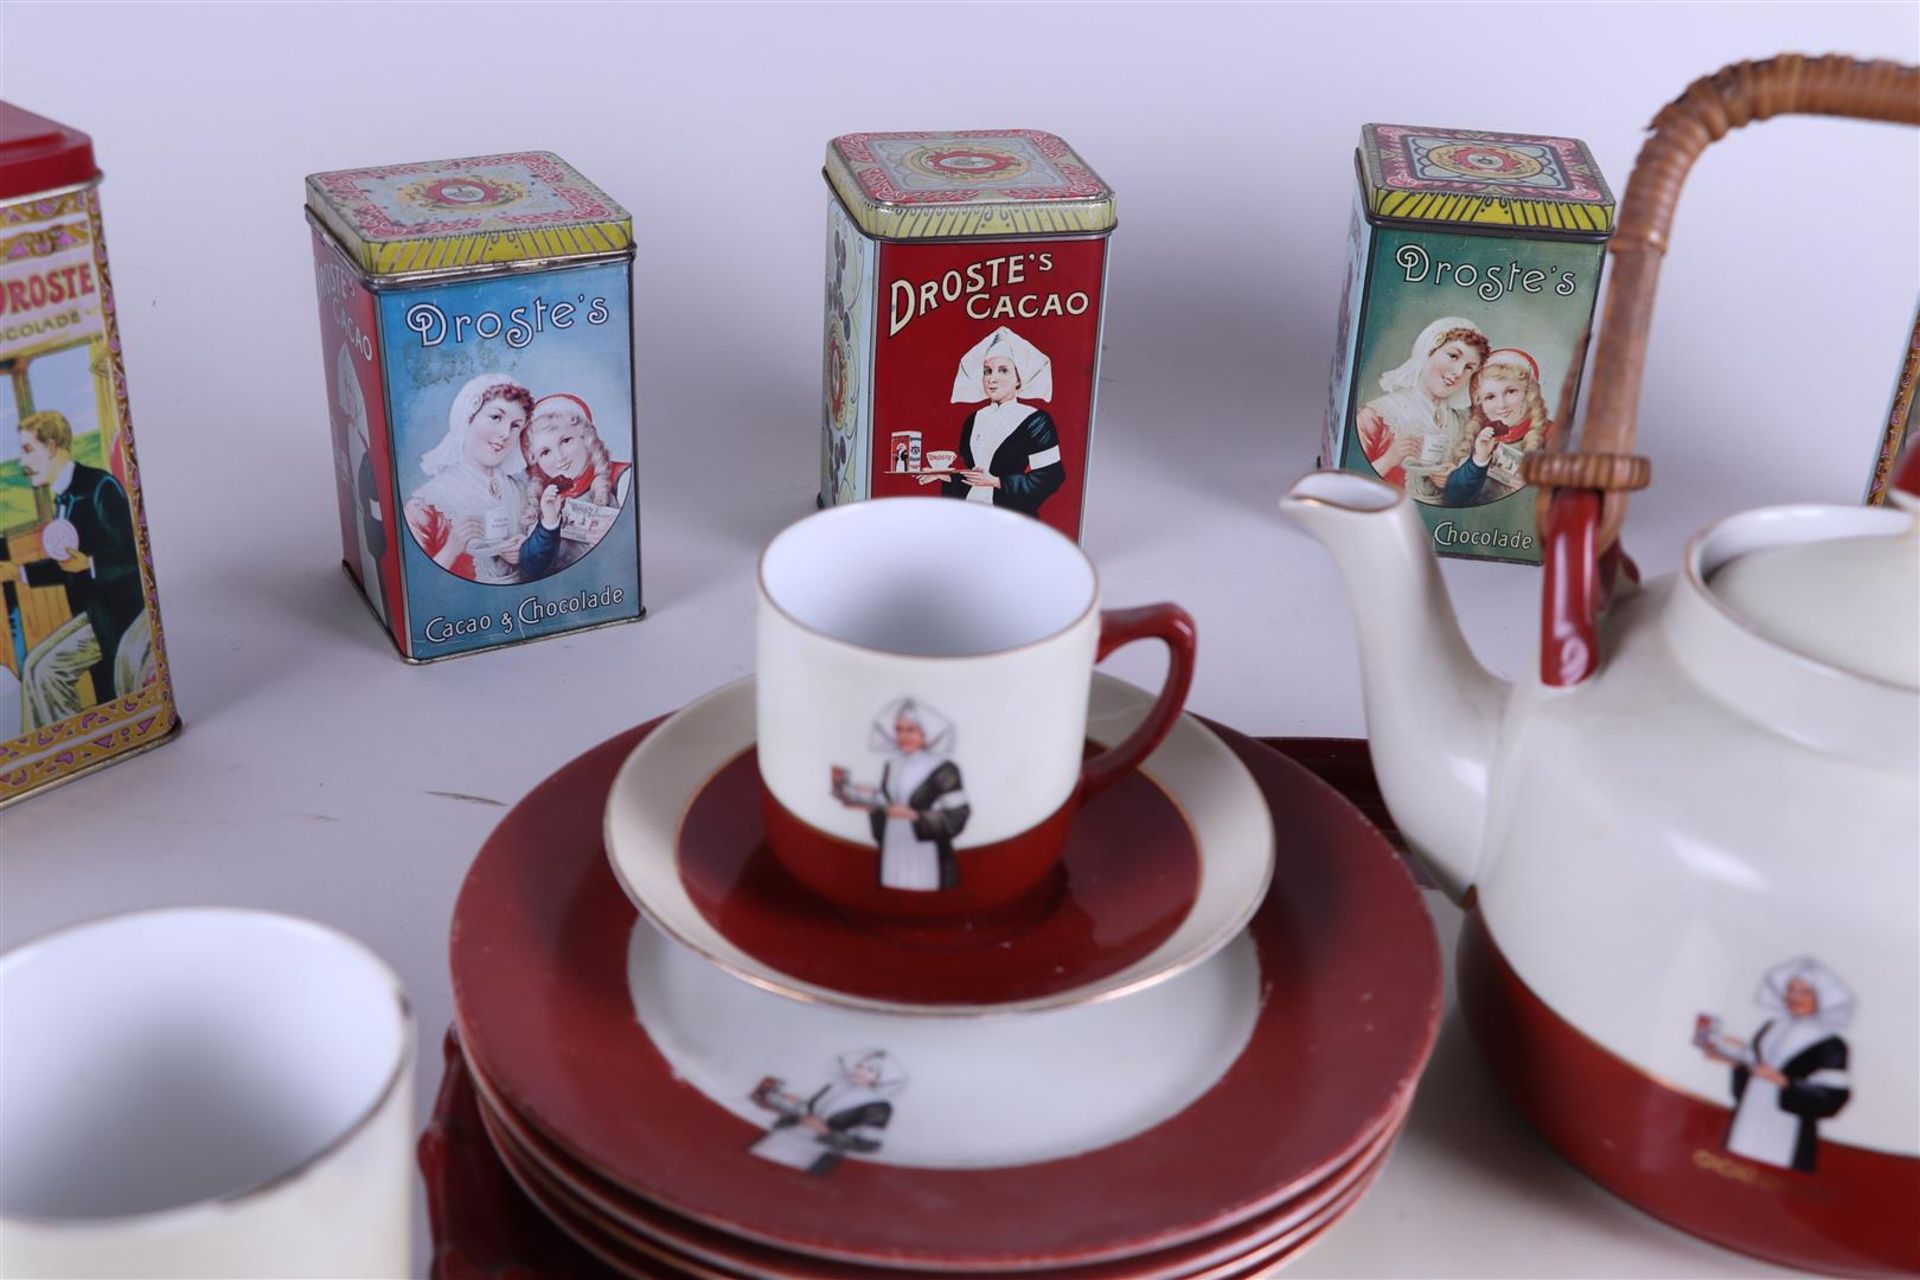 A Droste Cocoa service 1920/1930.  Together with a  few Droste tins. - Image 3 of 3